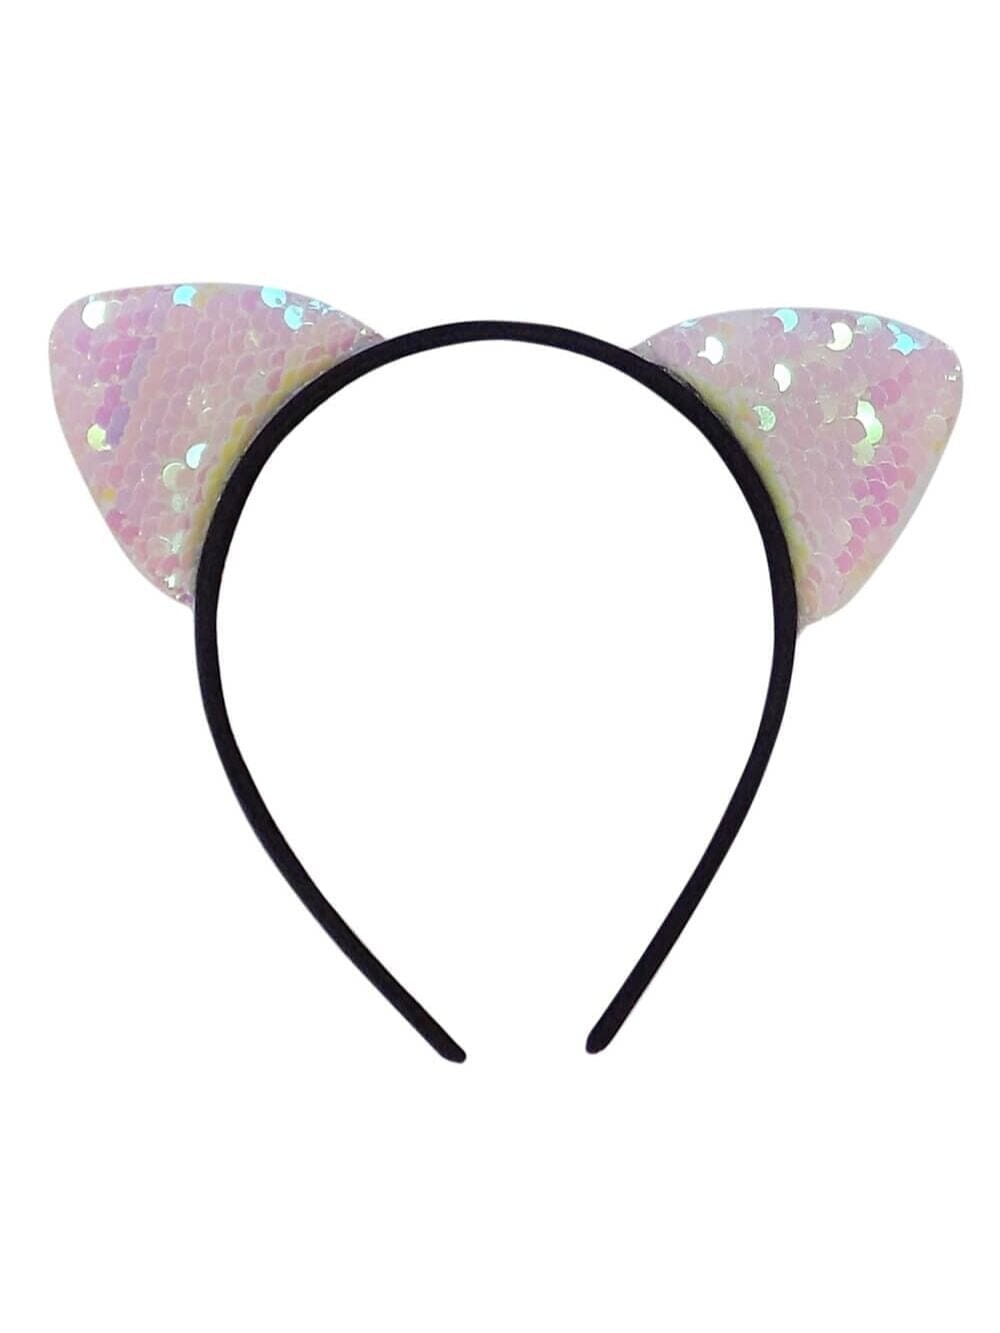 Flip Sequin White Cat Girls Headband Ears, Kid or Adult Size Costume Accessories - Sydney So Sweet